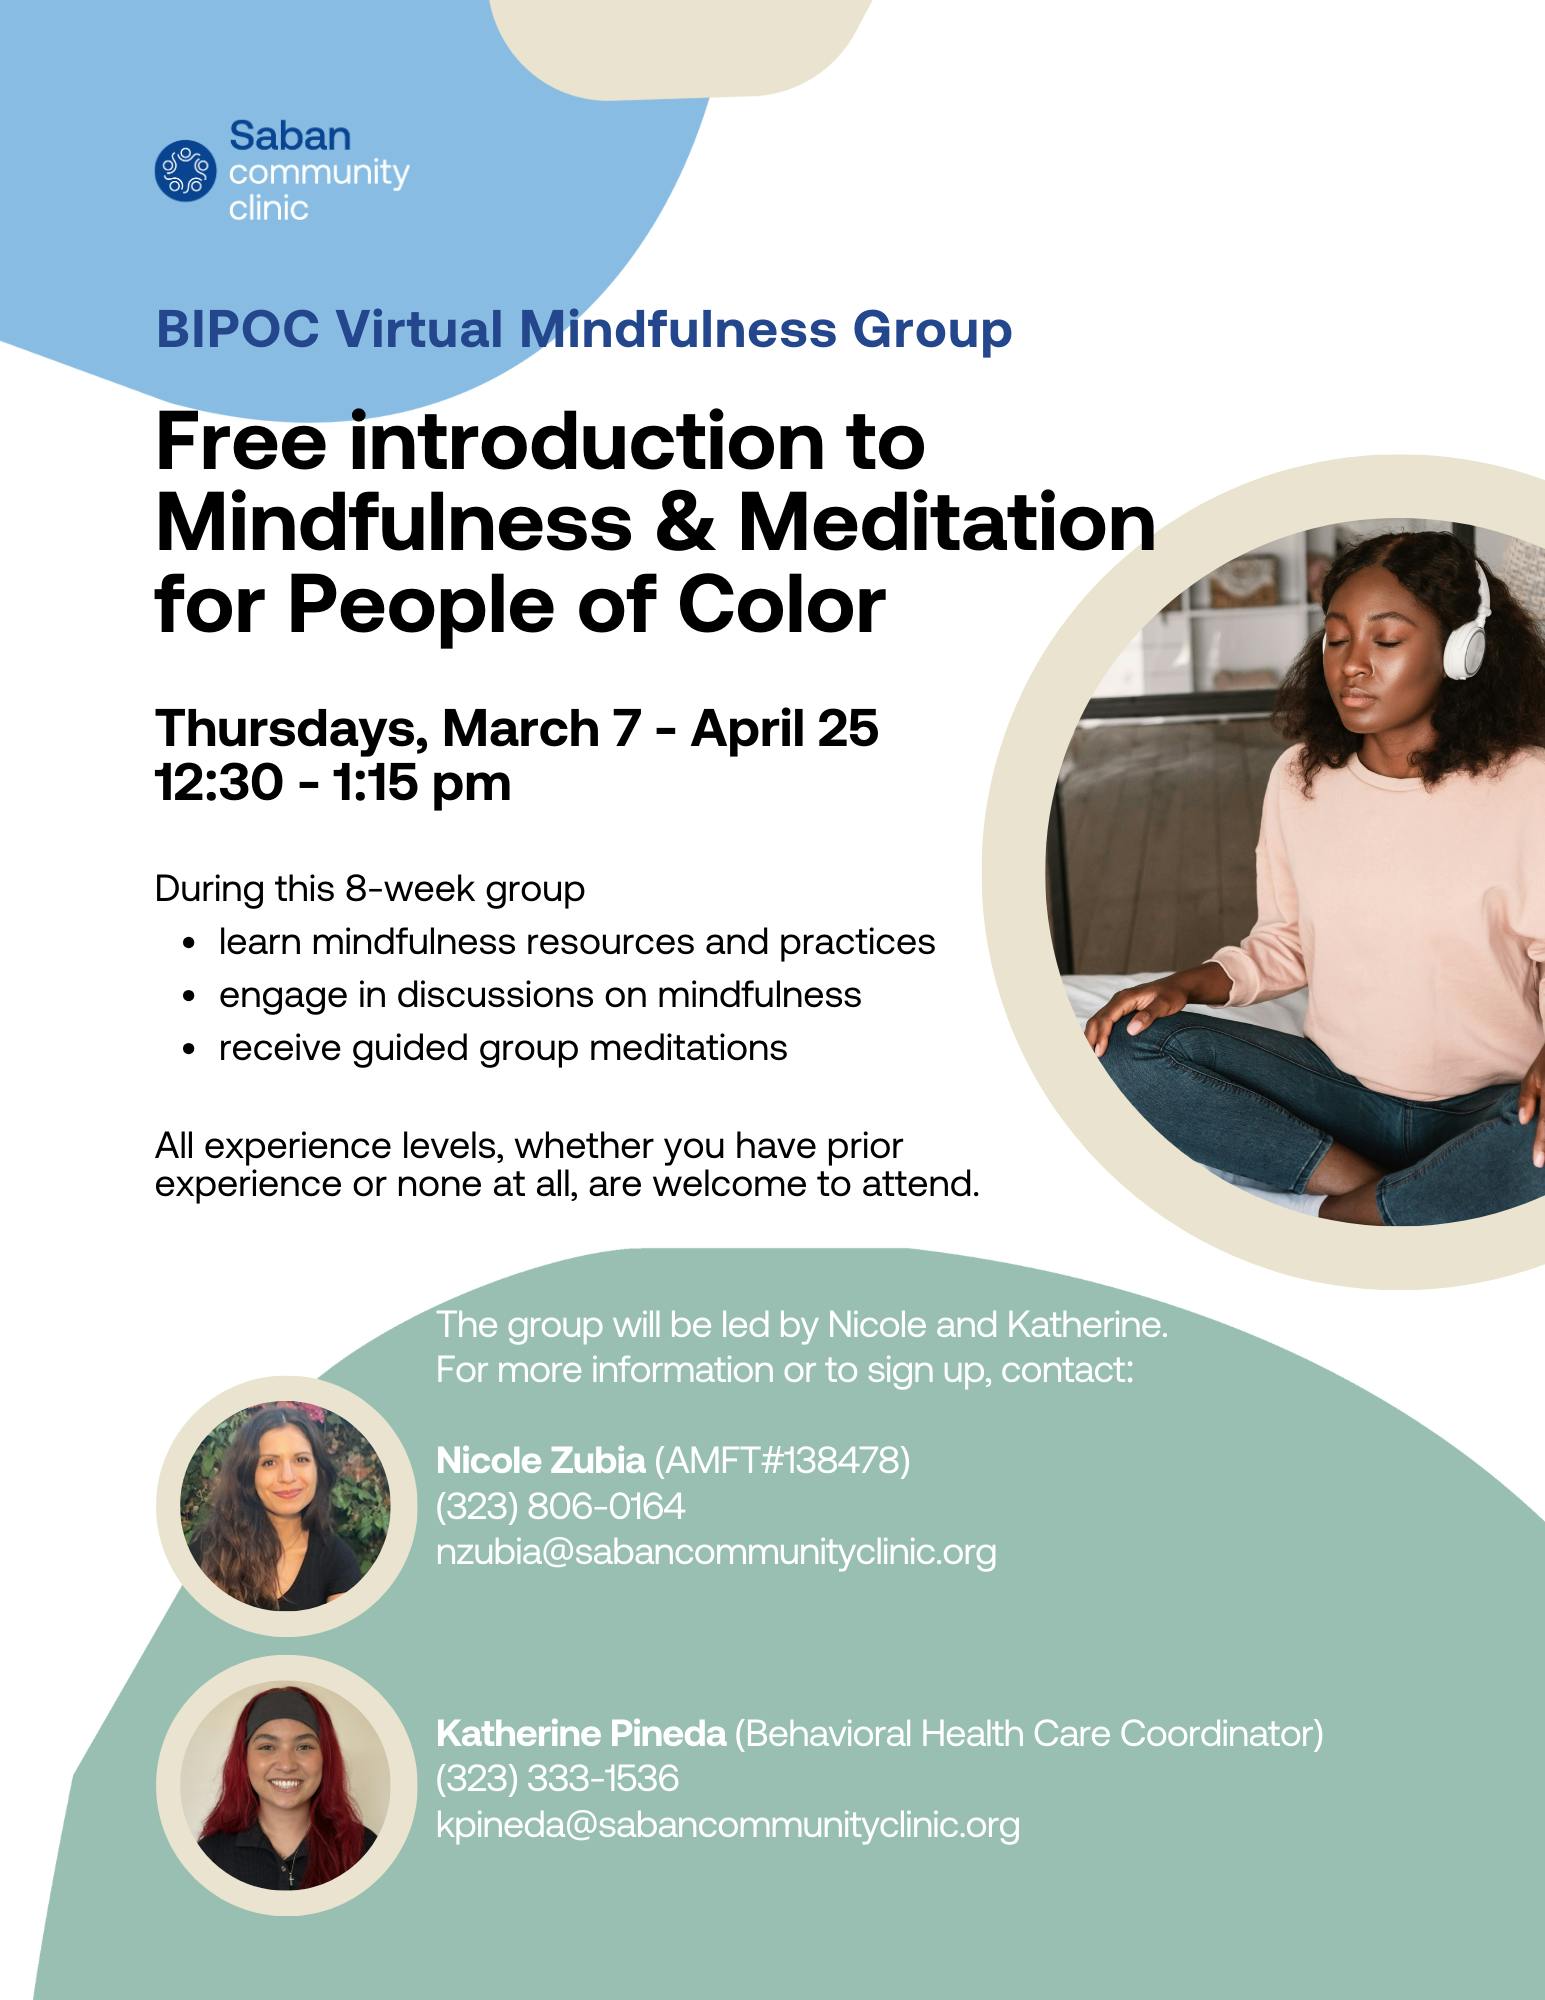 Free introduction to Mindfulness and Meditation for People of Color